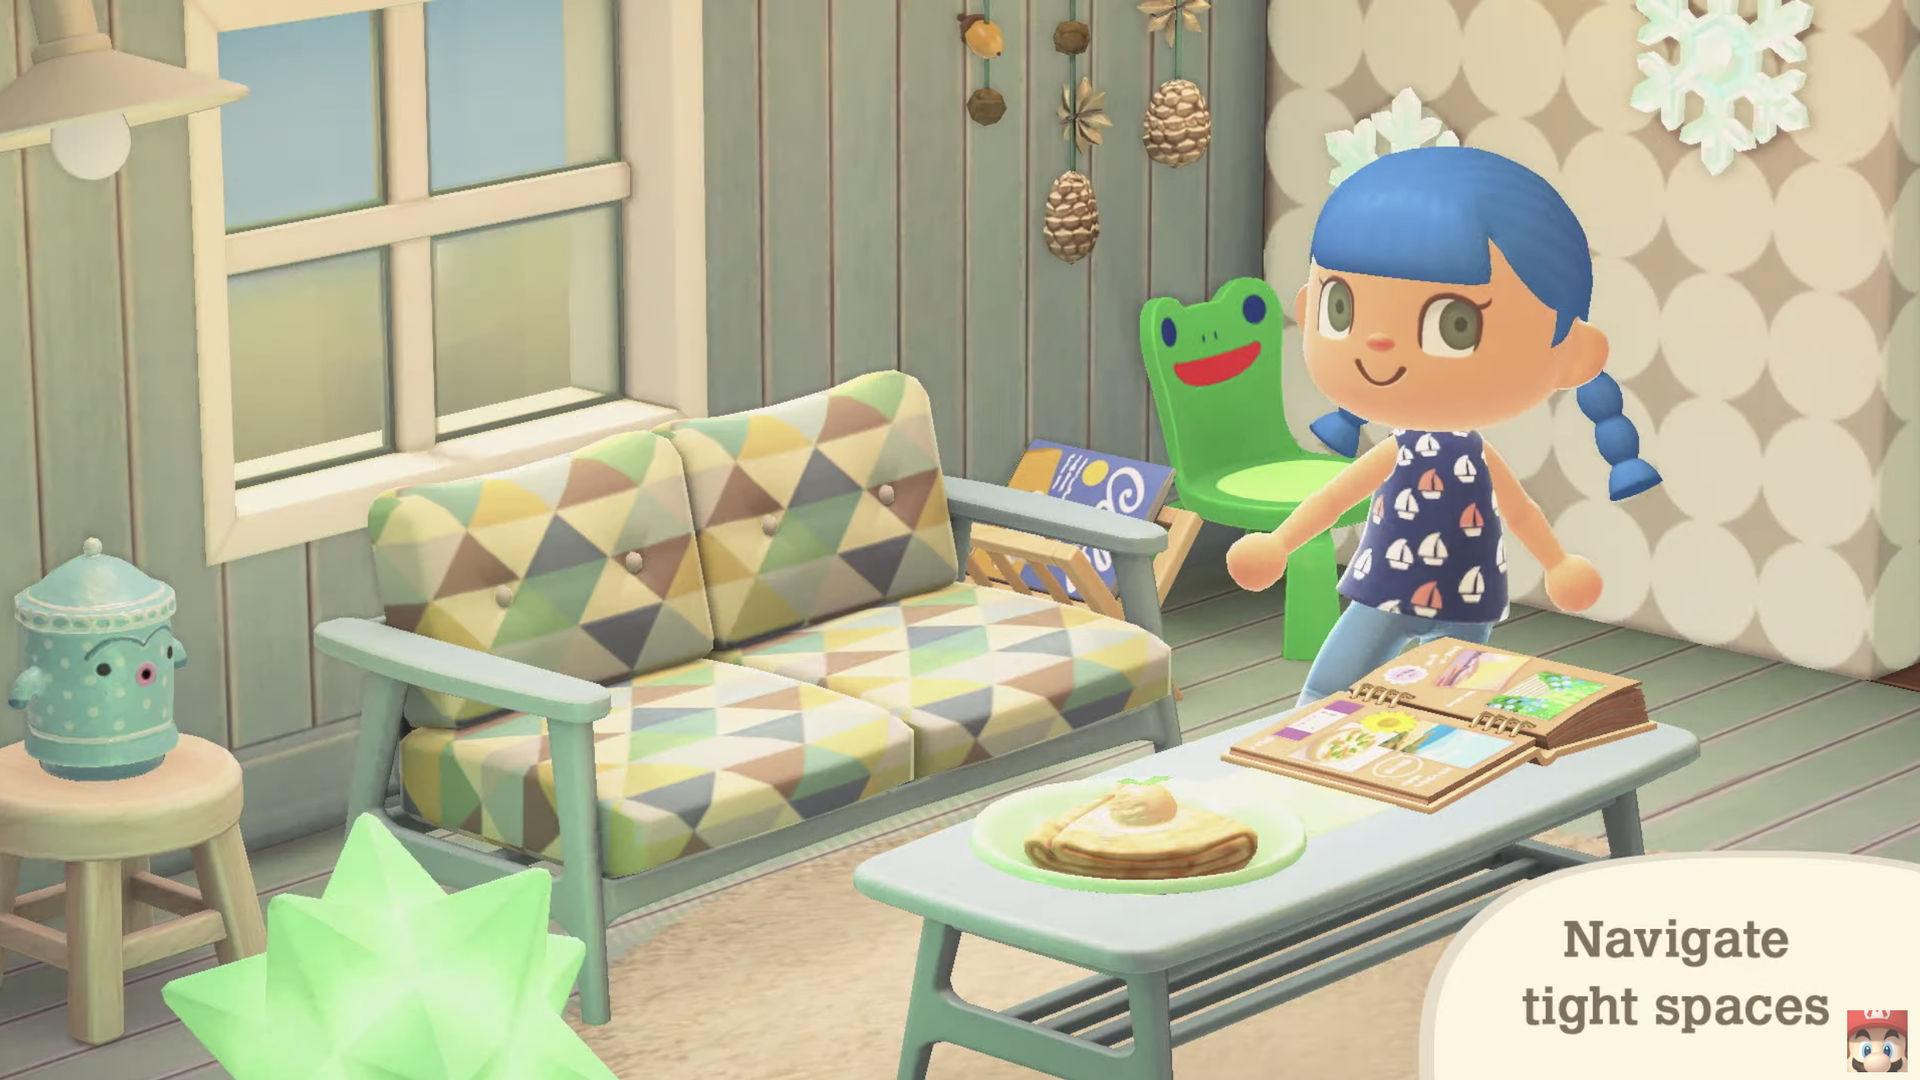 An Animal Crossing character walks past a green chair that sports the face of a frog